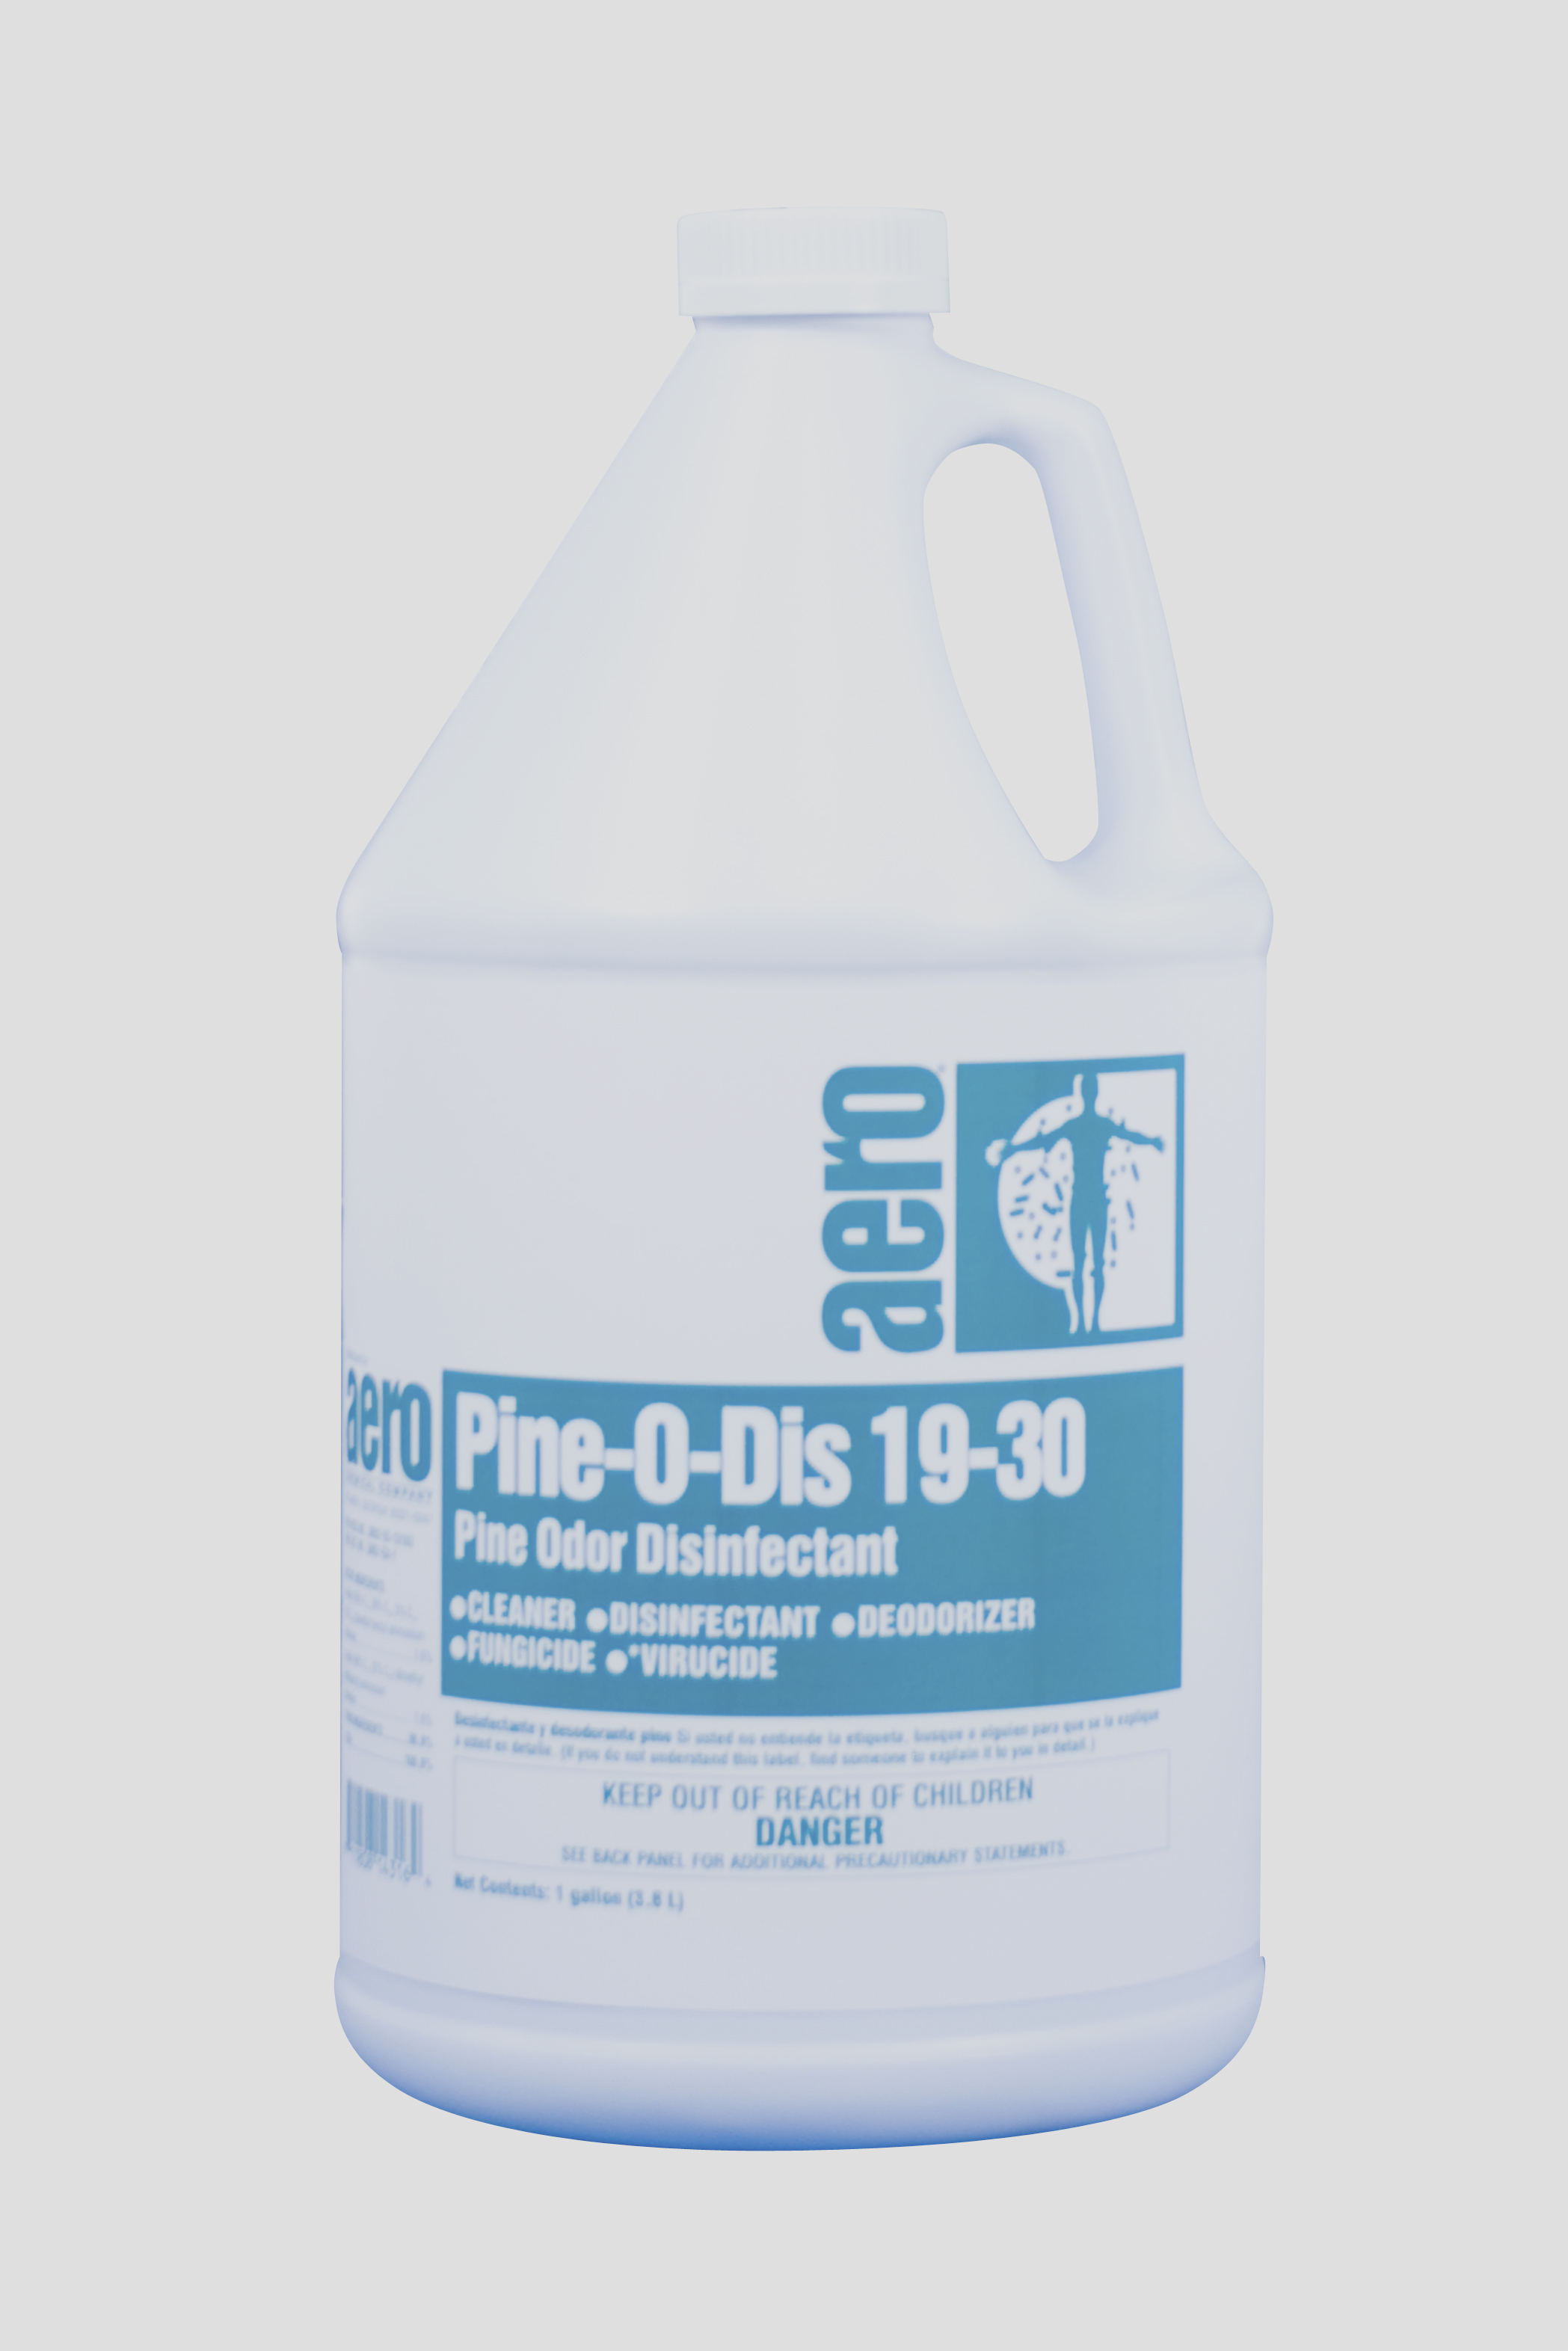 PINE-O-DIS CLEANER / DISINFECTANT 4/1 GALLONS